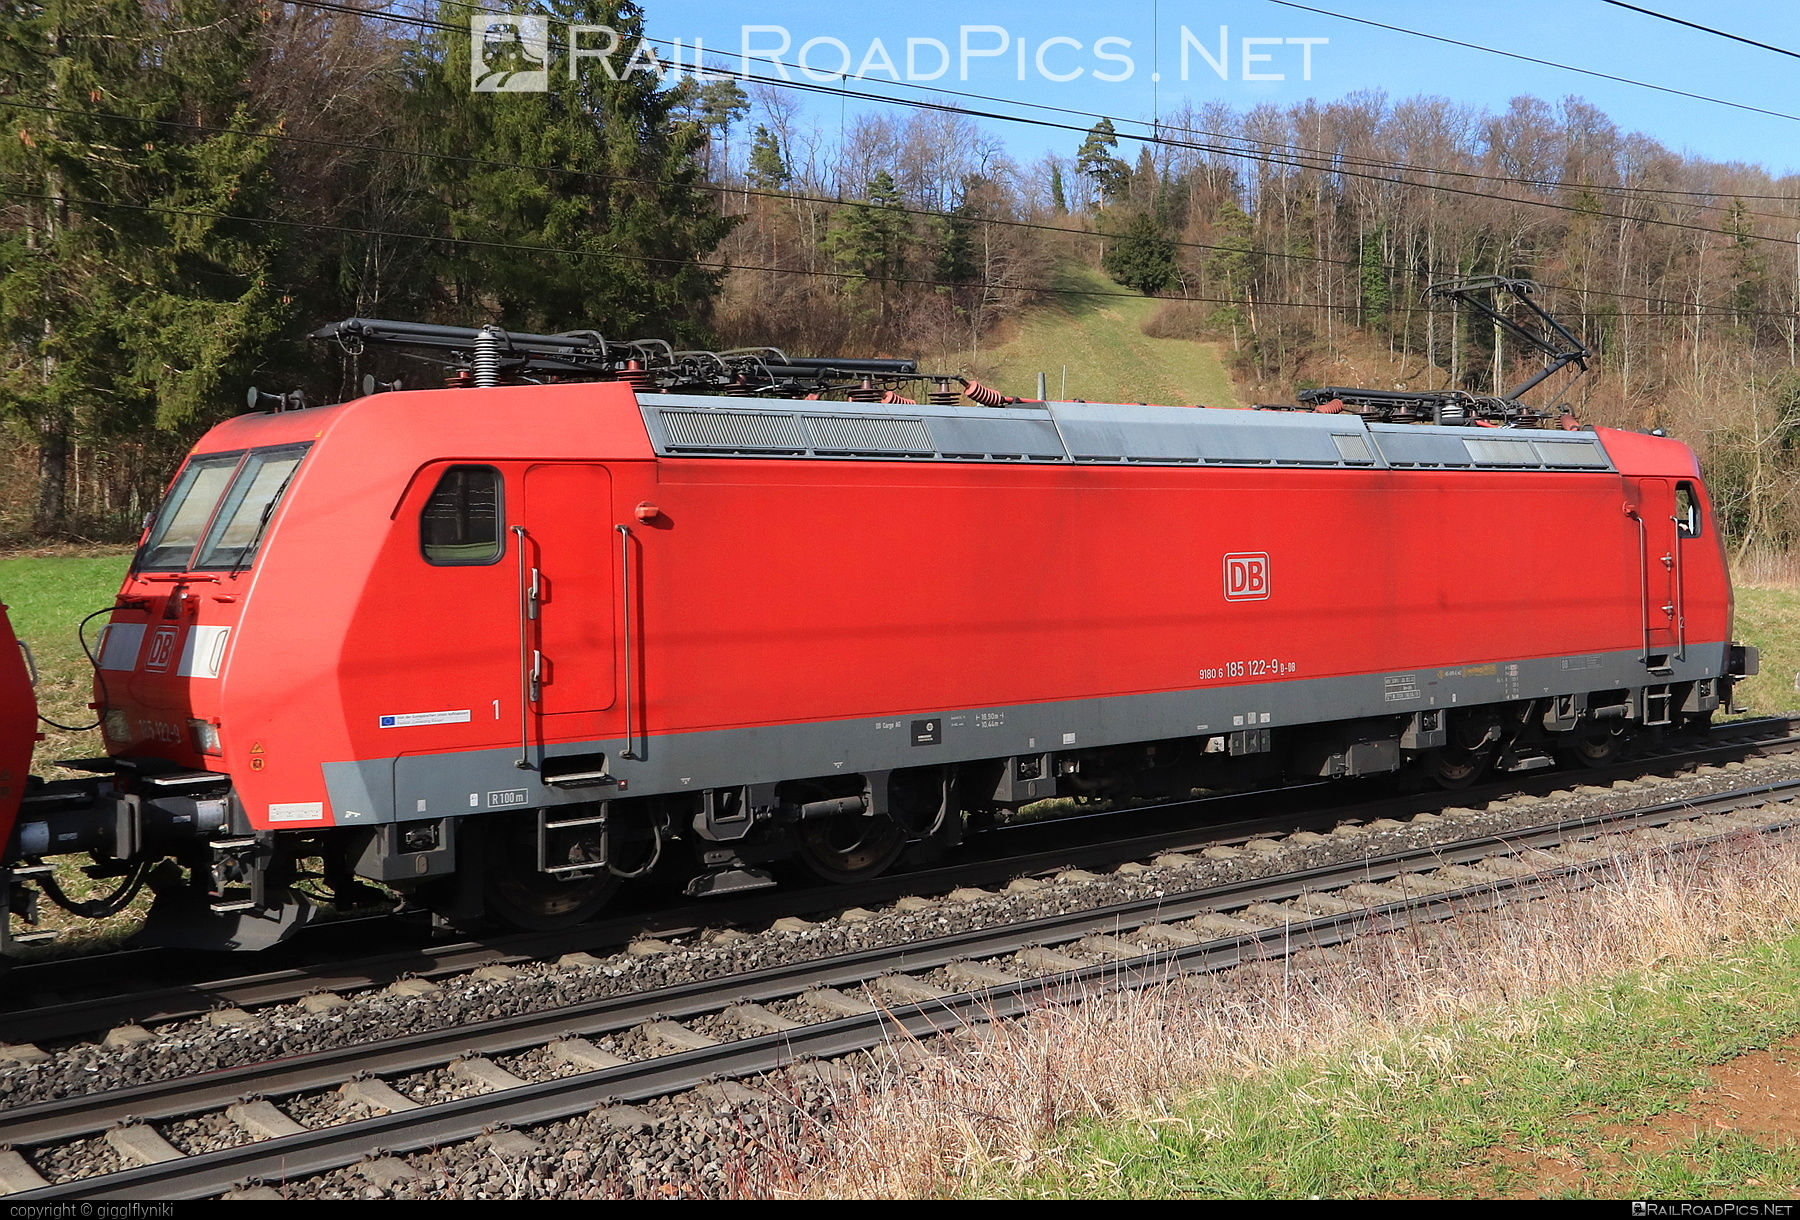 Bombardier TRAXX F140 AC1 - 185 122-9 operated by DB Cargo AG #bombardier #bombardiertraxx #db #dbcargo #dbcargoag #deutschebahn #traxx #traxxf140 #traxxf140ac #traxxf140ac1